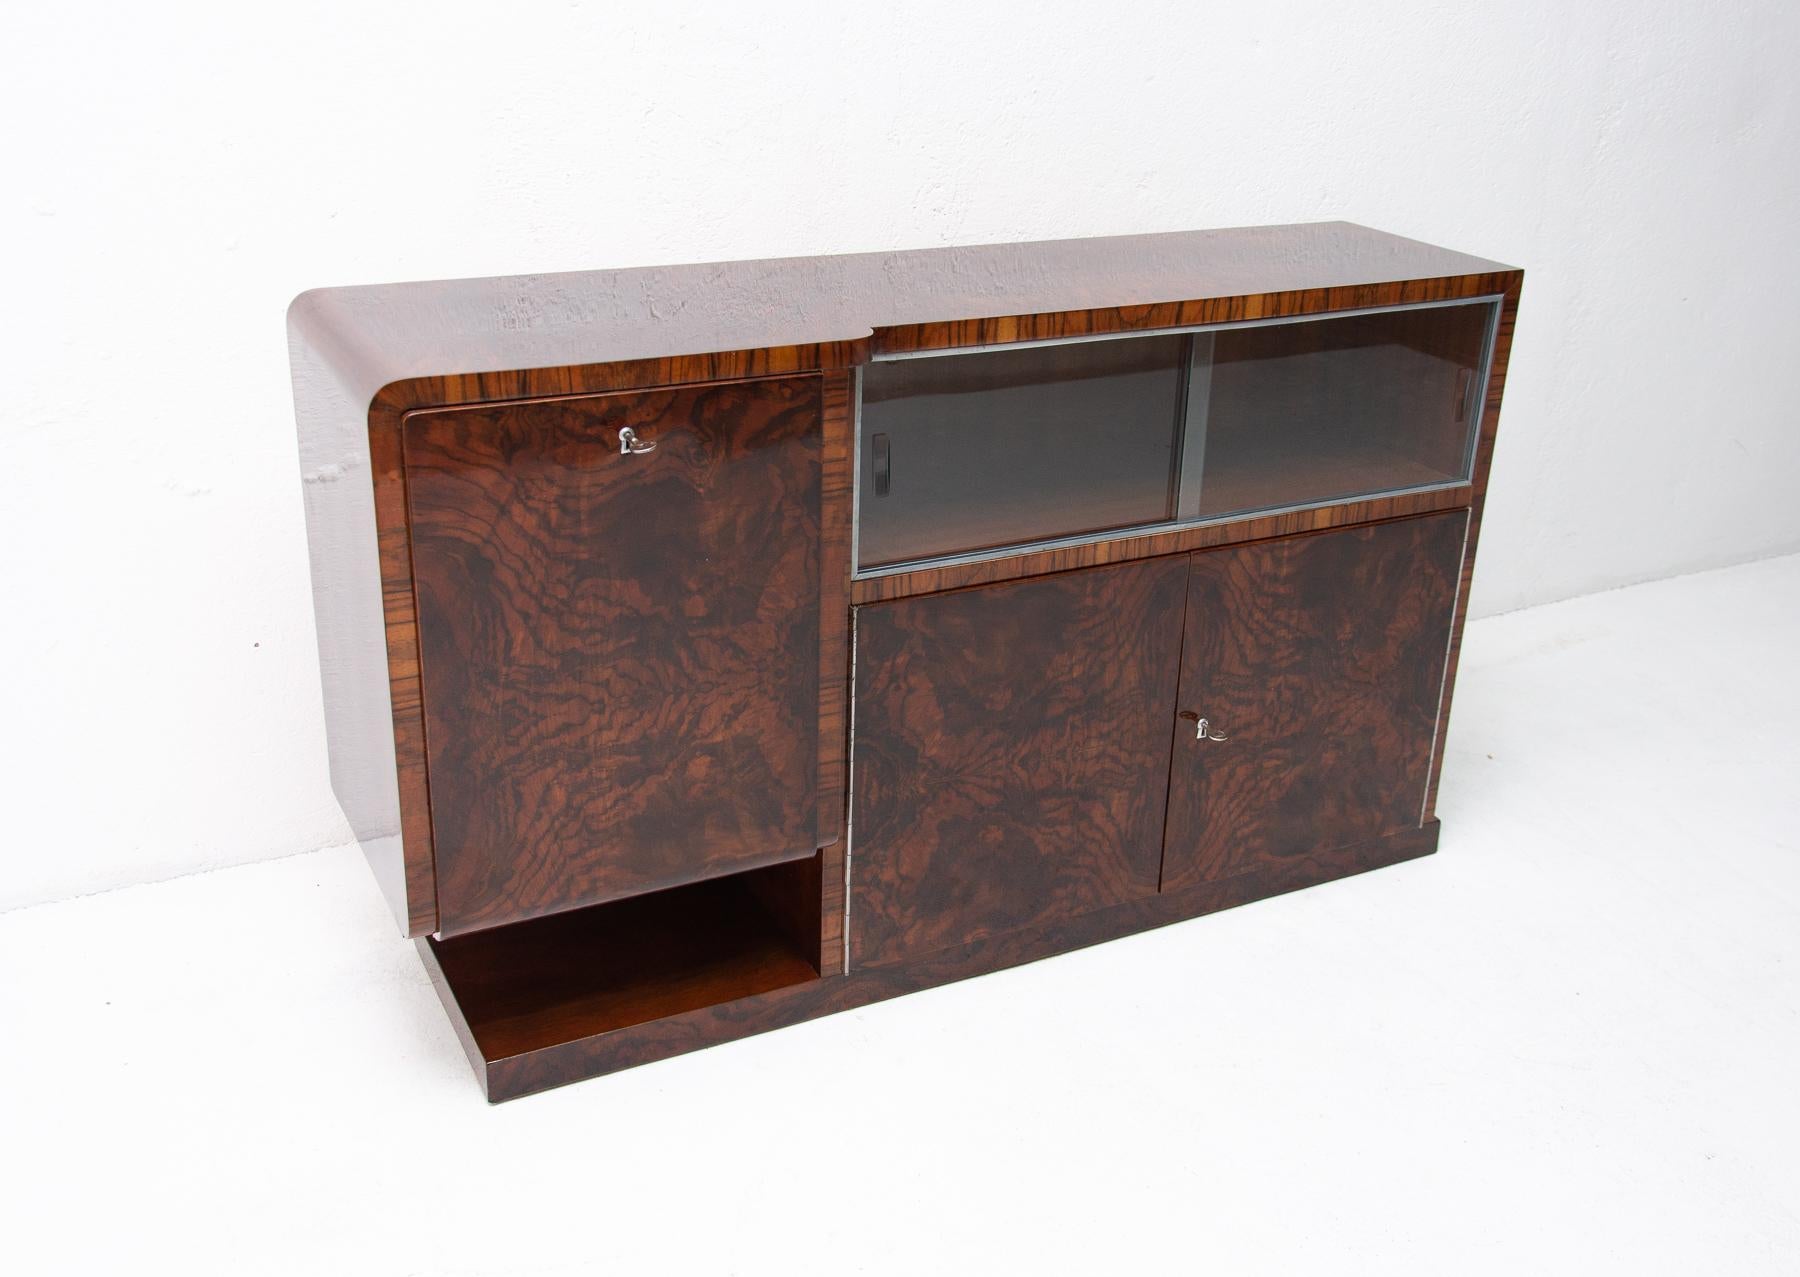 Bohemian functionalist glazed sideboard in walnut veneer. It was made in the 1930s. It features a very simple and practical design. Standing on a massive rectangular base. Consists of two drawers and two side storage space. One of them can be used